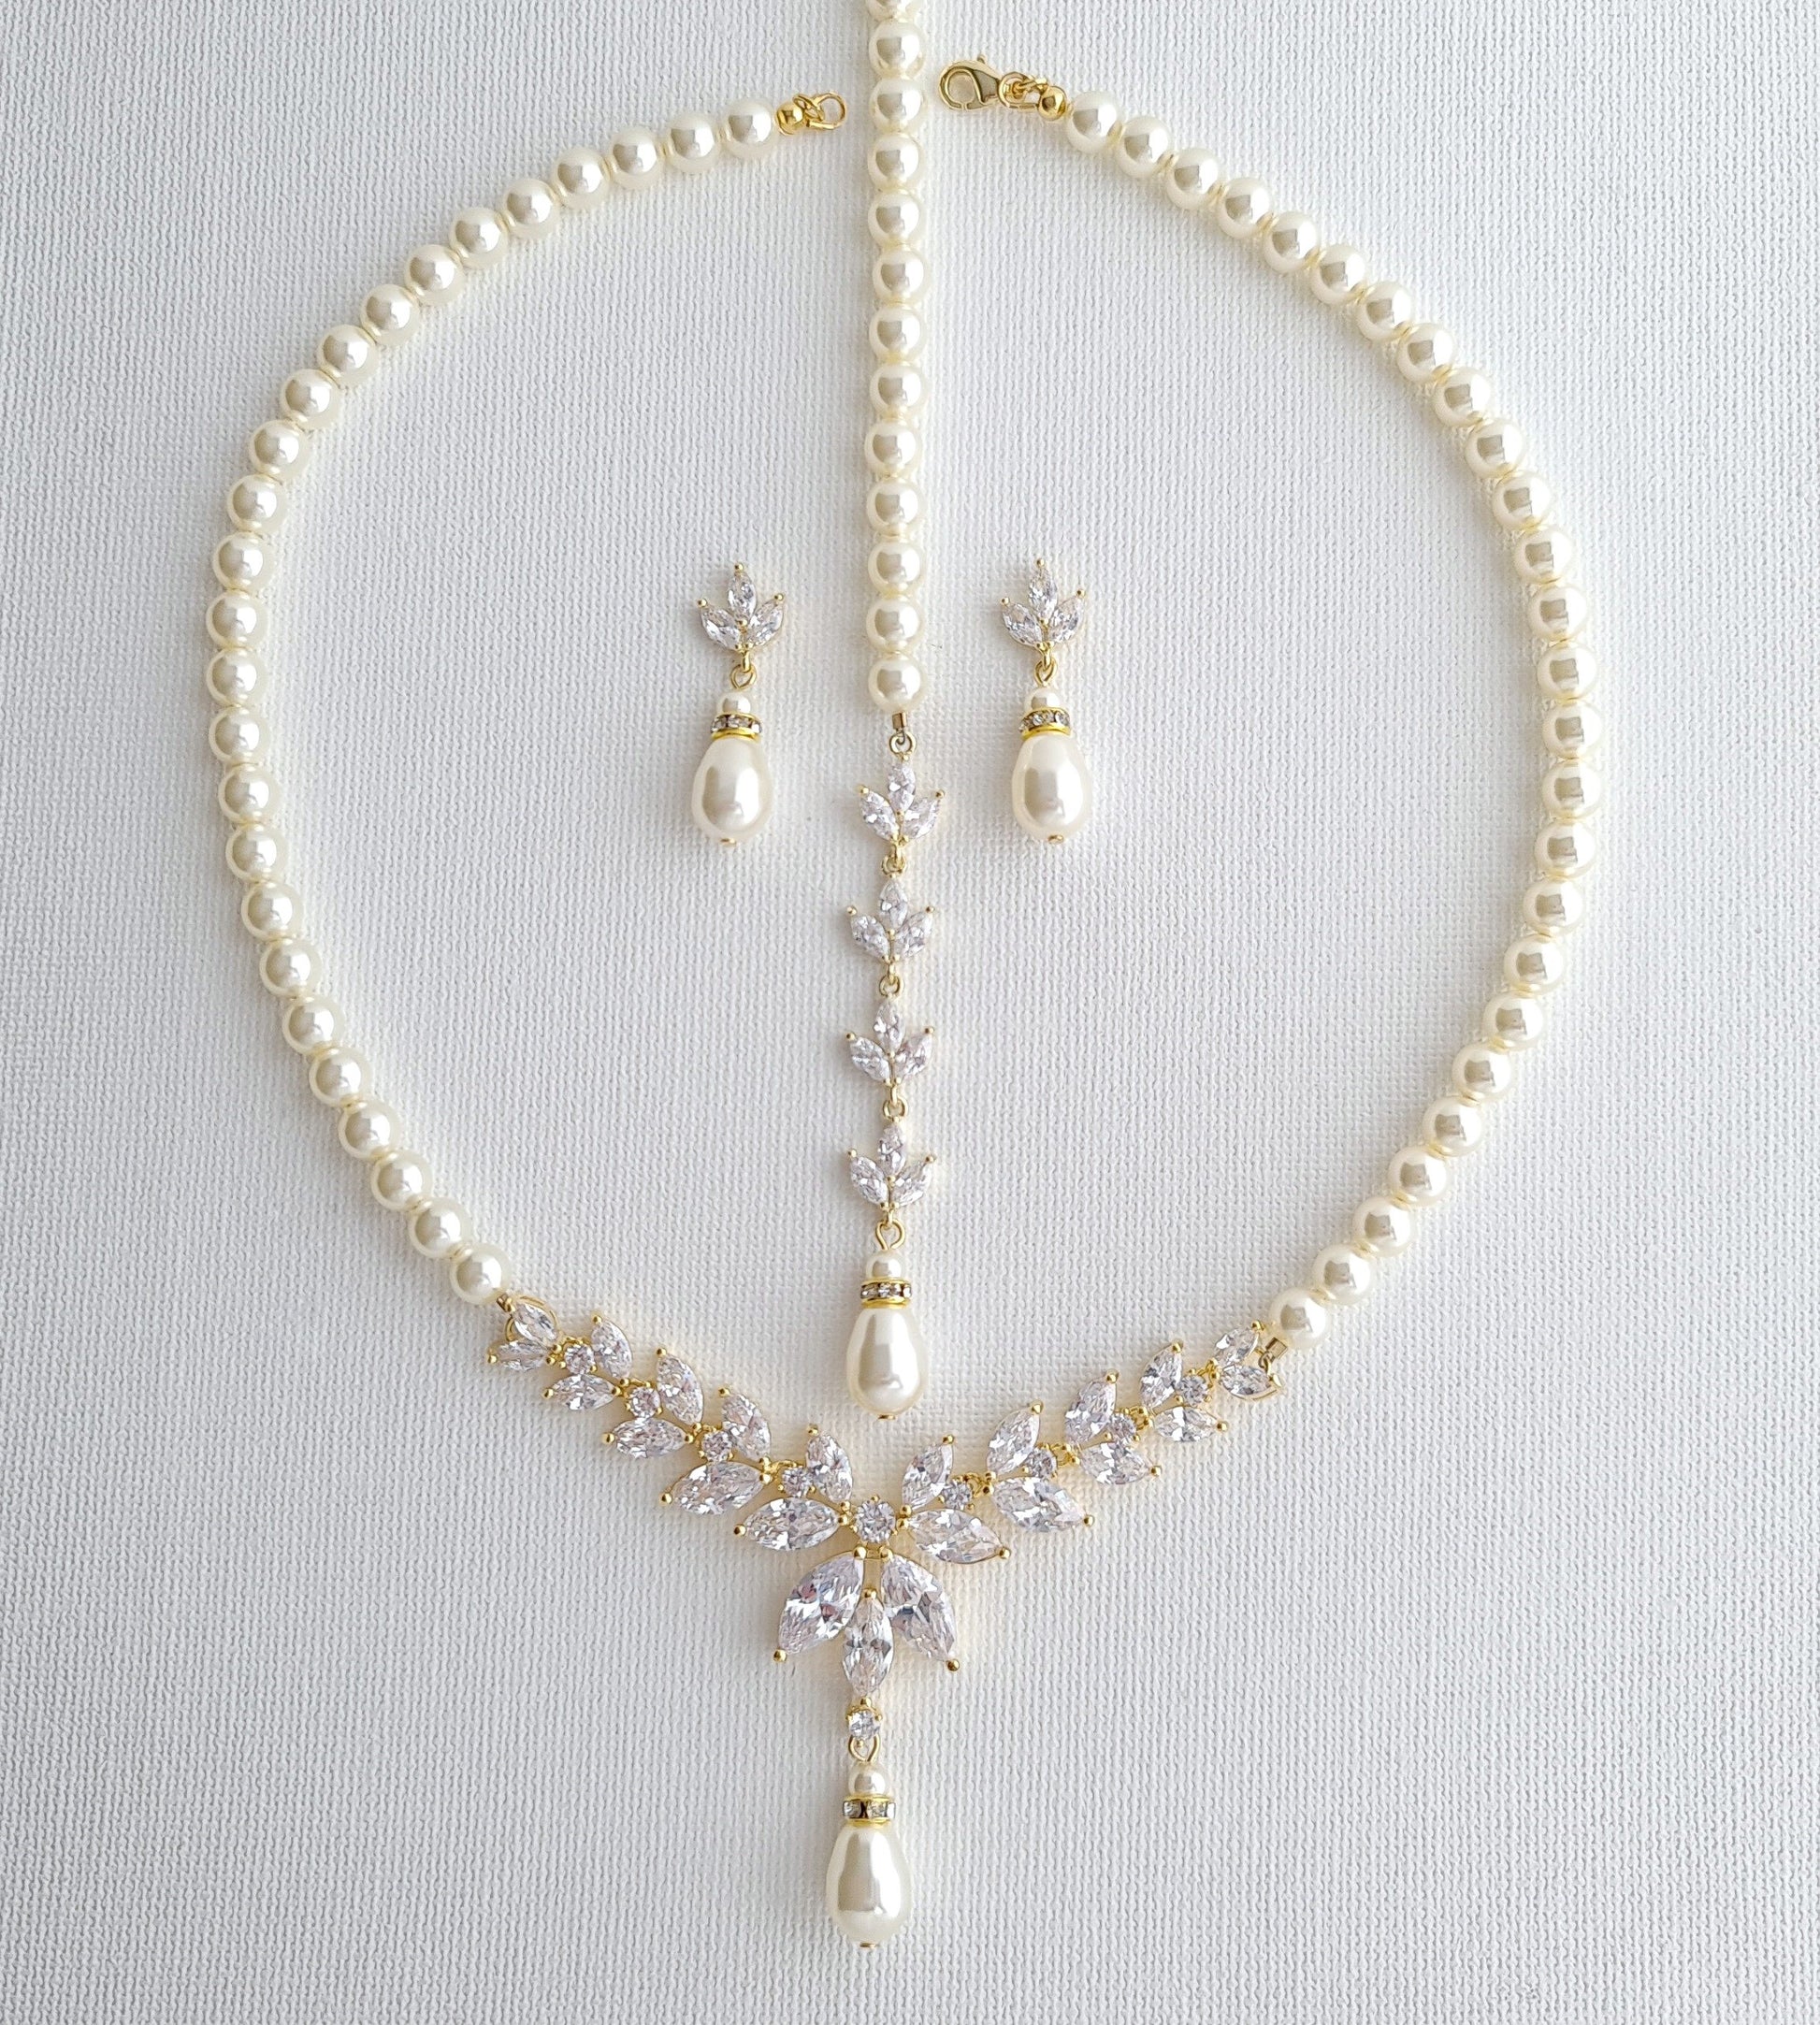 Pearl Bridal Jewelry Set in Ivory White or Cream Pearl Color with Necklace, Backdrop & Earrings-Katie - PoetryDesigns